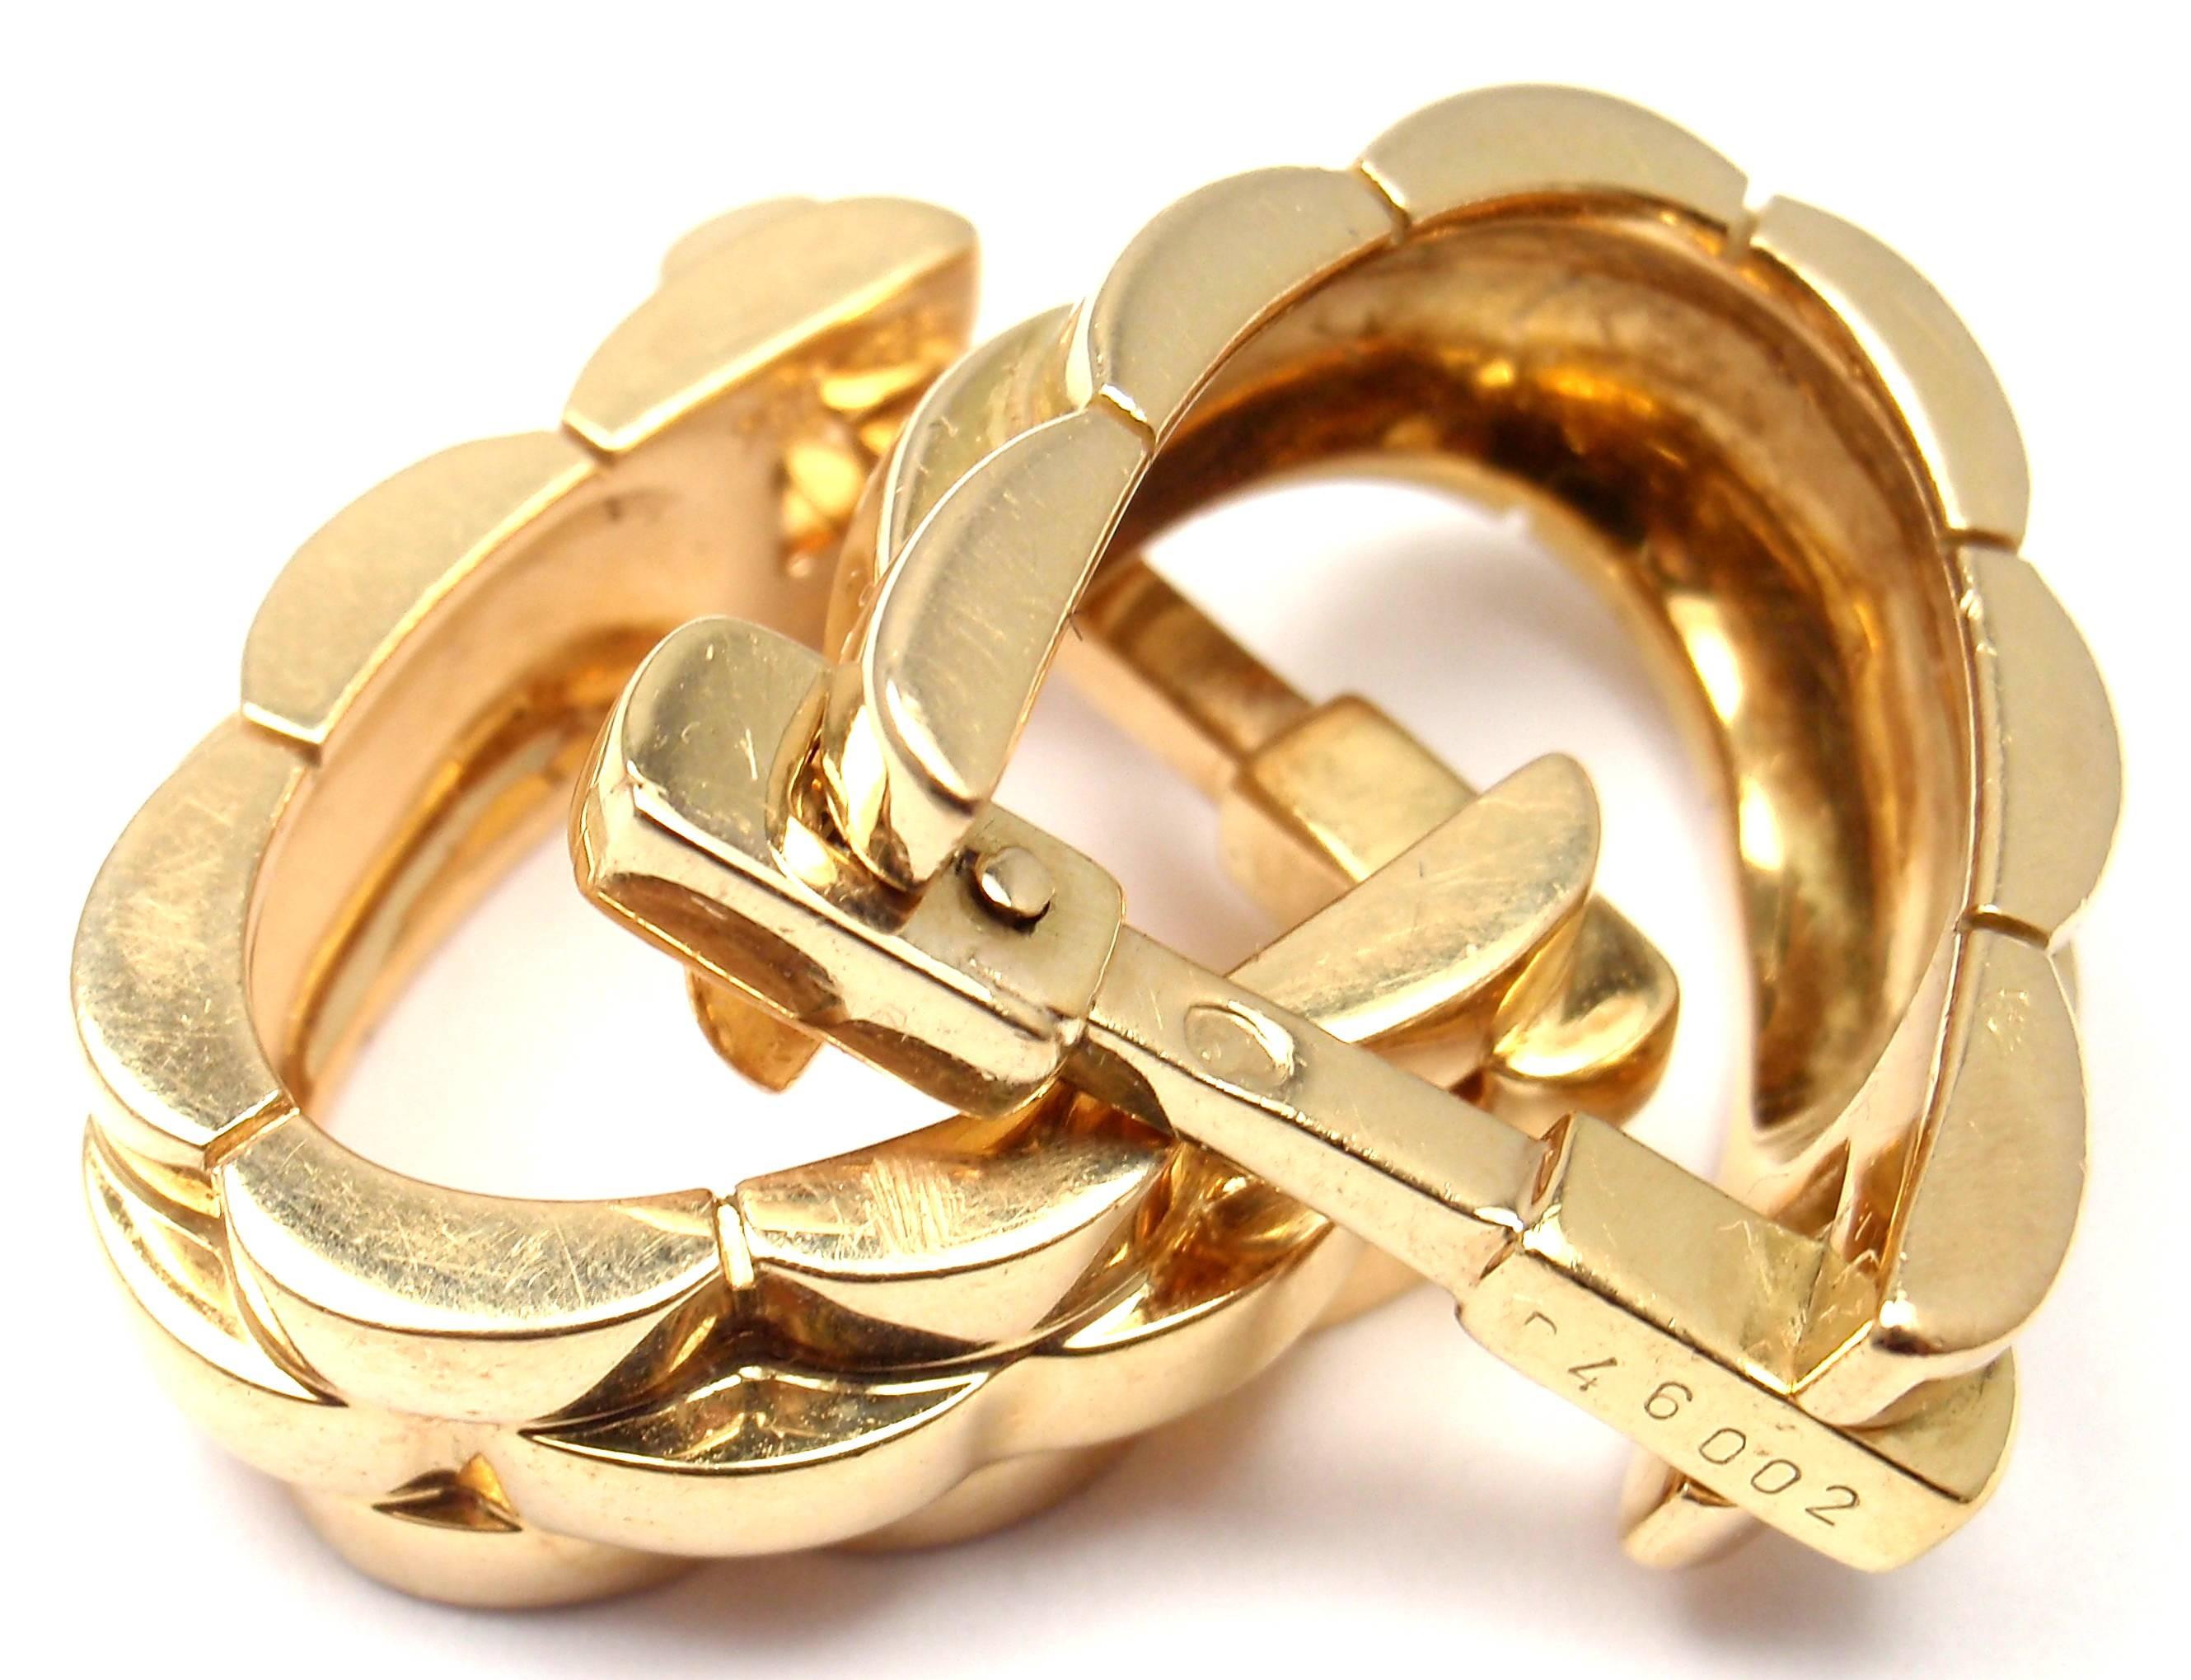 Cartier Panthere Maillon Stirrup Gold Cufflinks For Sale 2